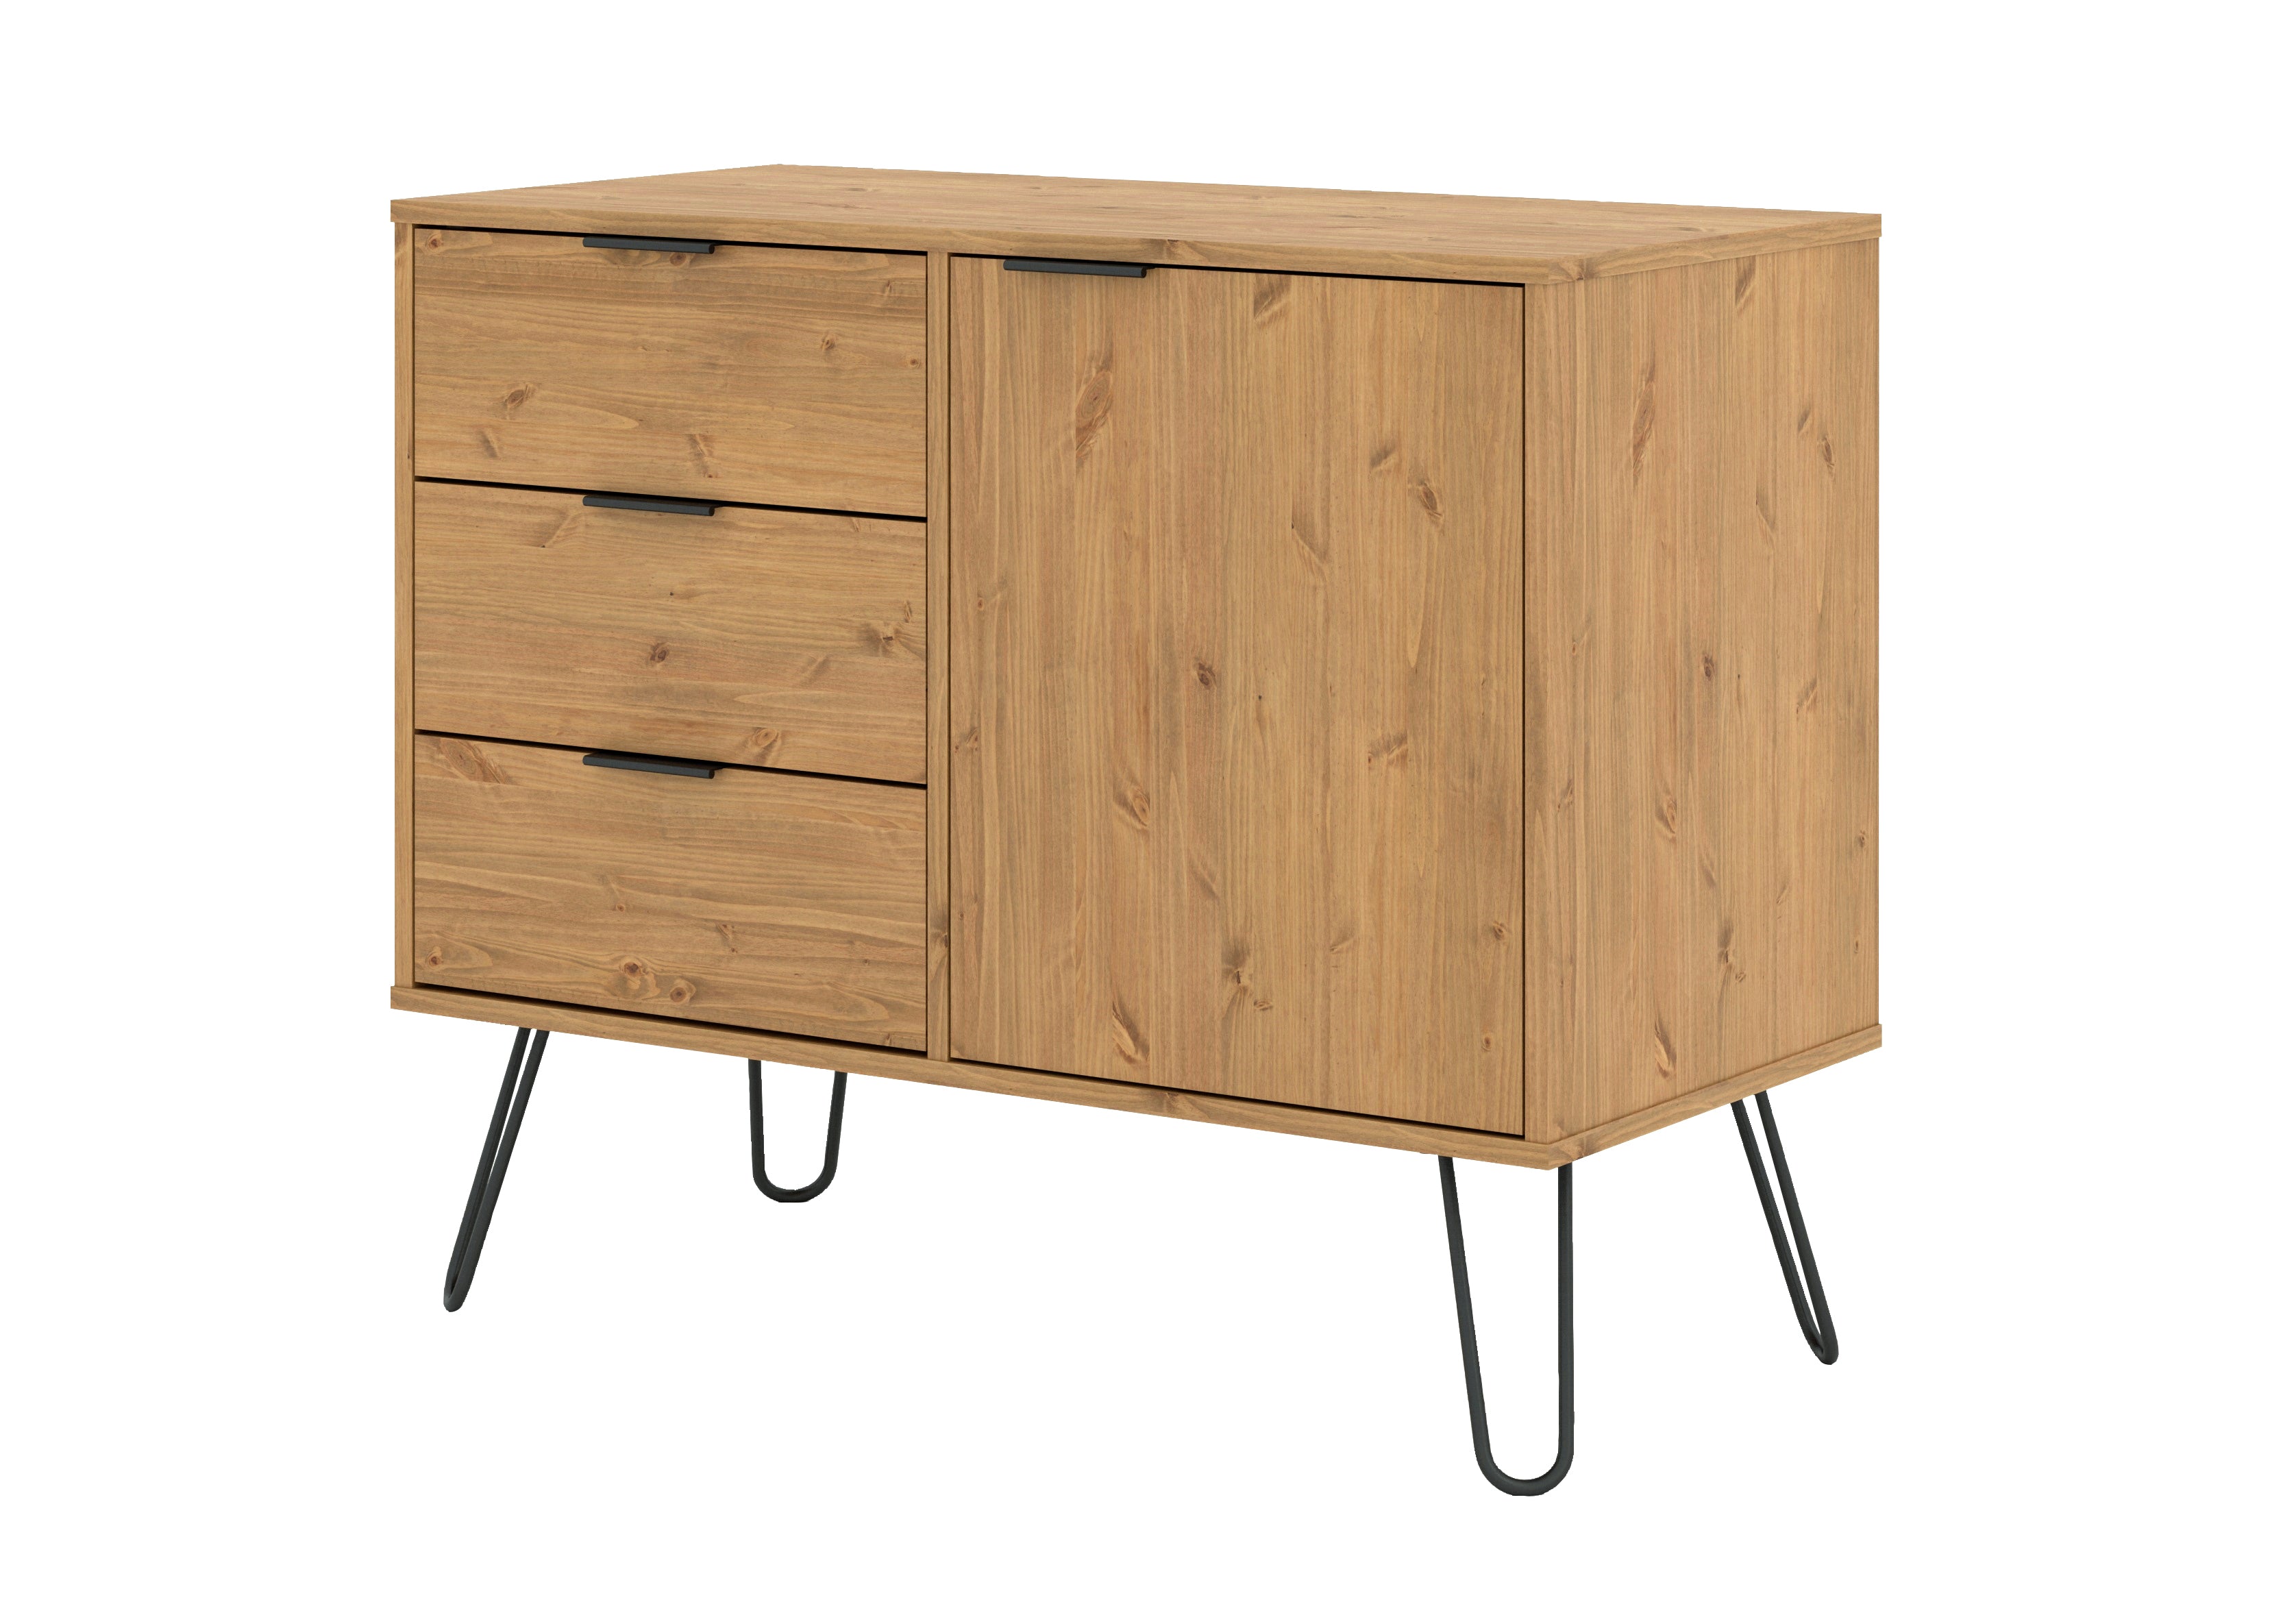 Small Sideboard With 1 Door, 3 Drawers